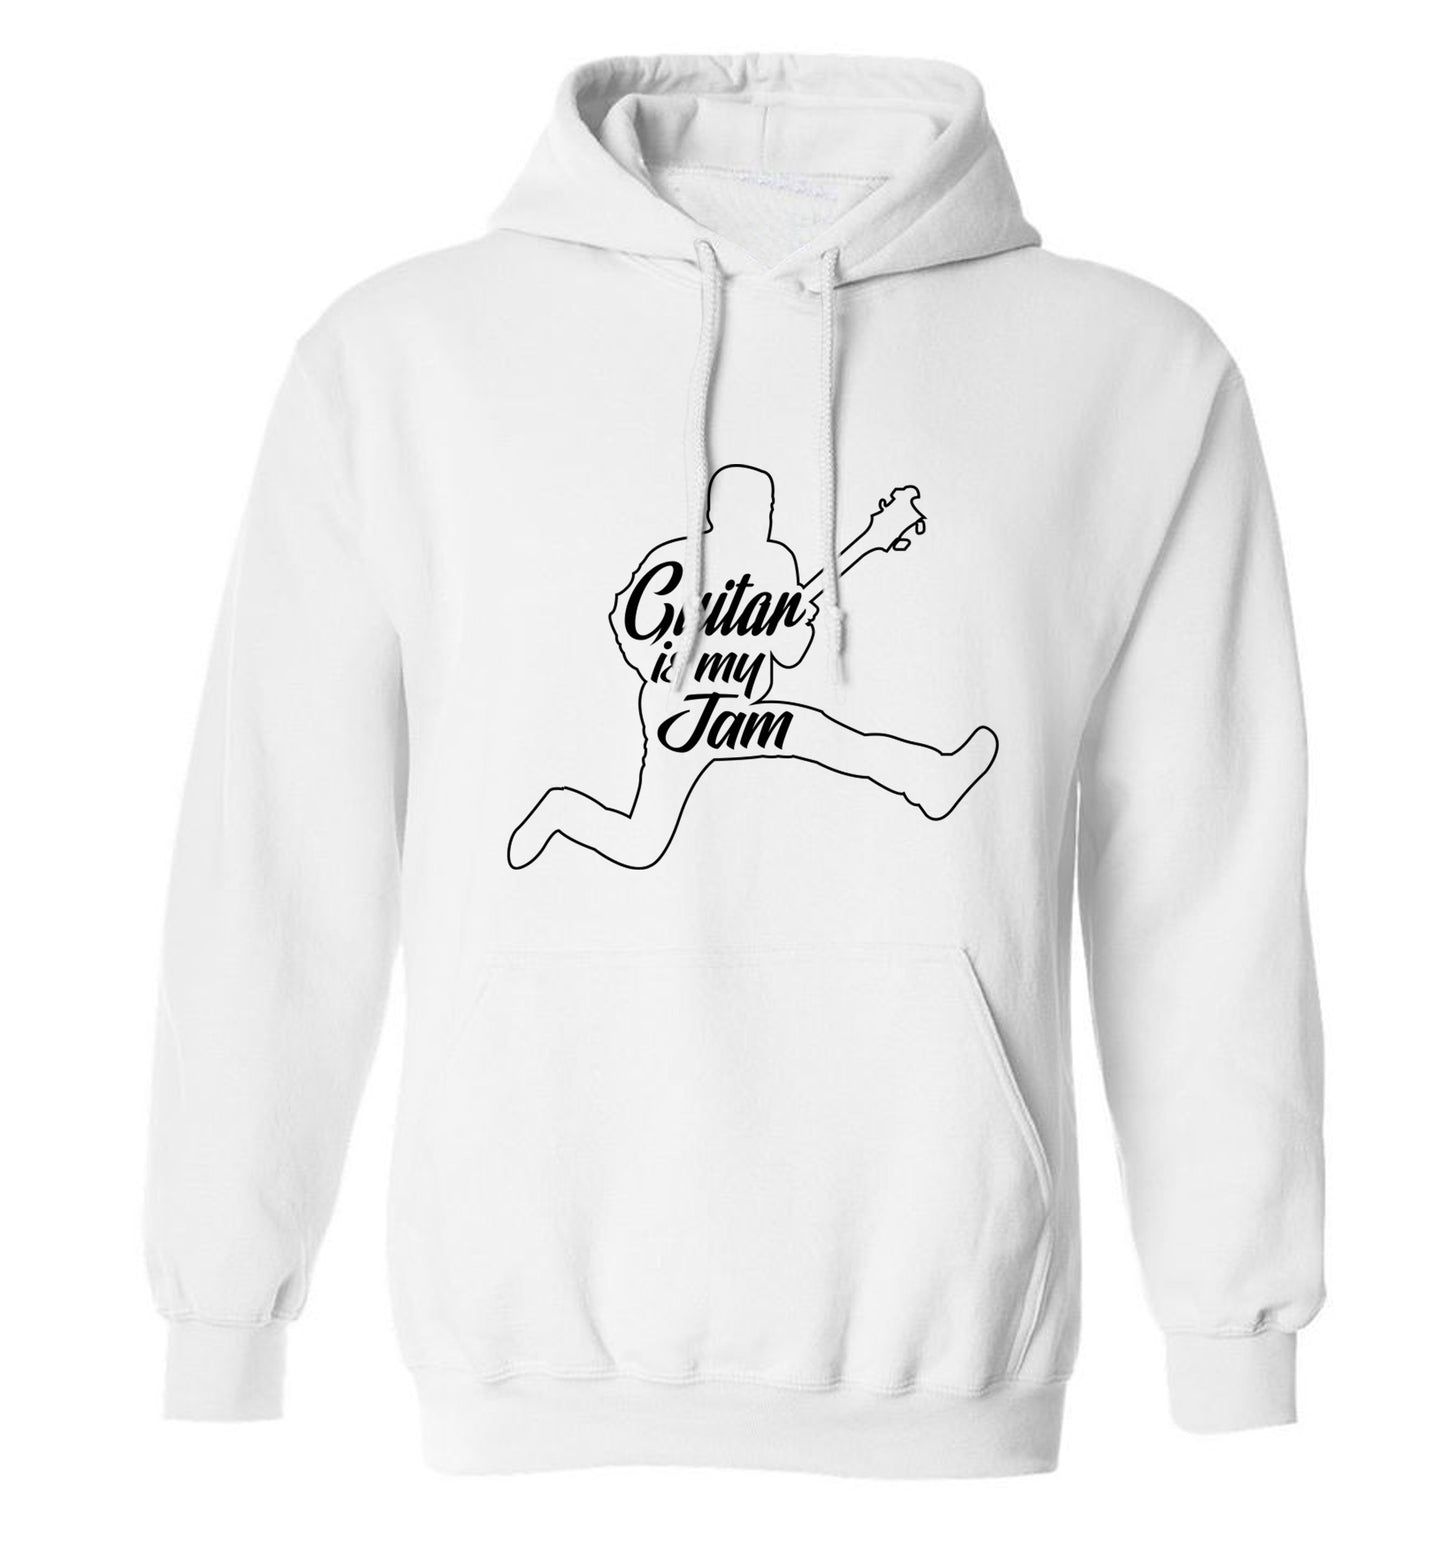 Guitar is my jam adults unisex white hoodie 2XL